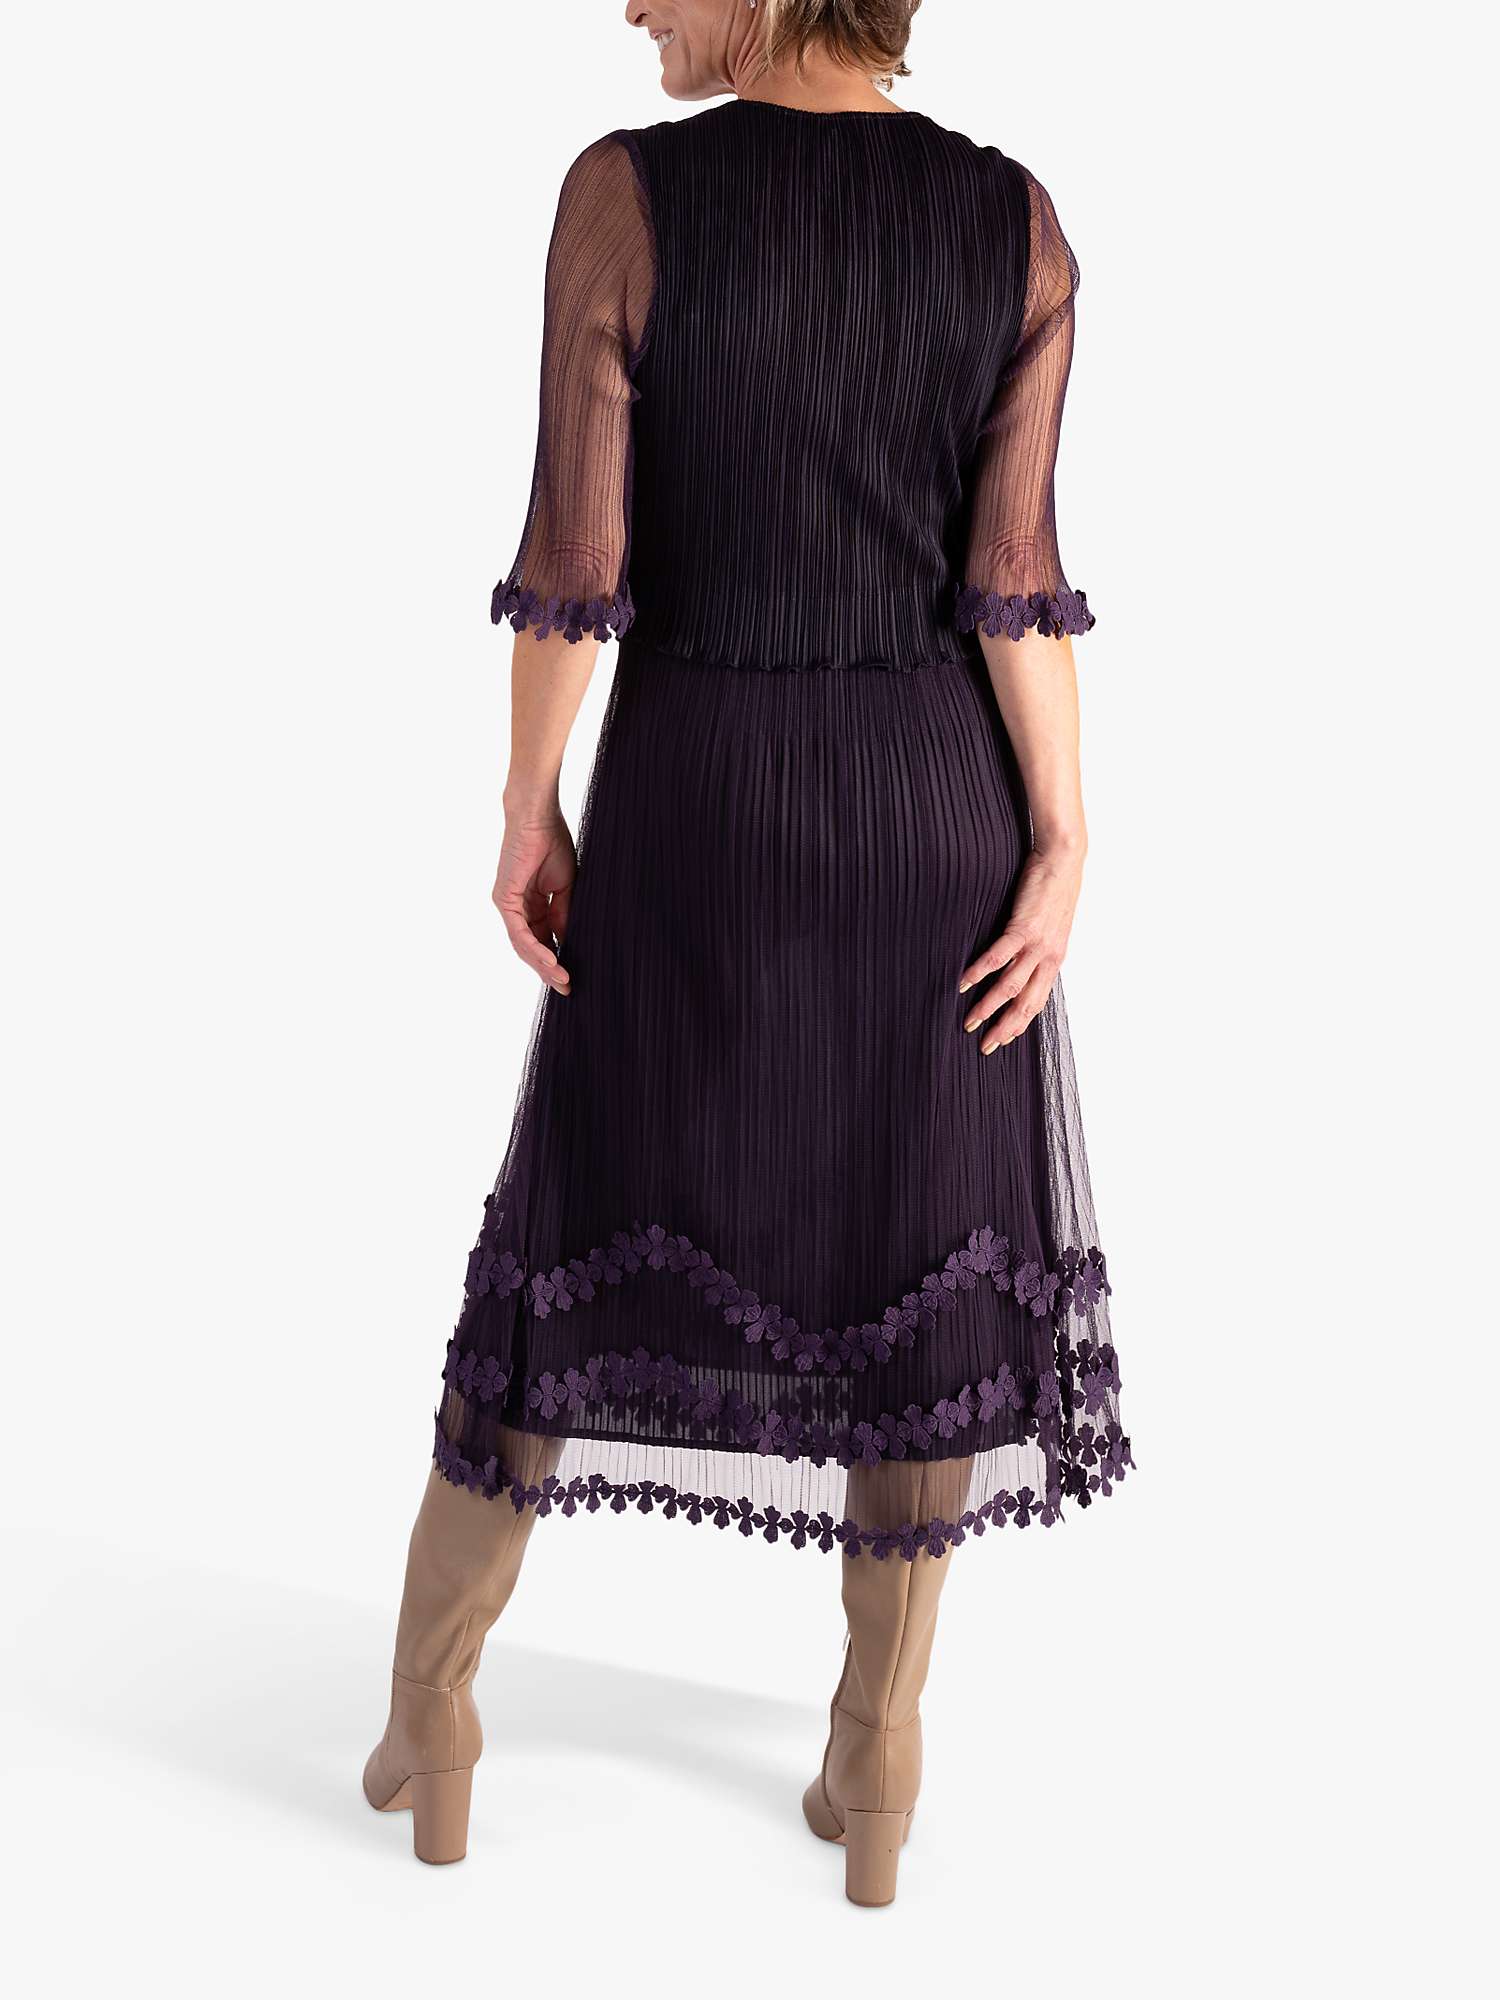 chesca Mock Layer Daisy Chain Dress, Grape at John Lewis & Partners